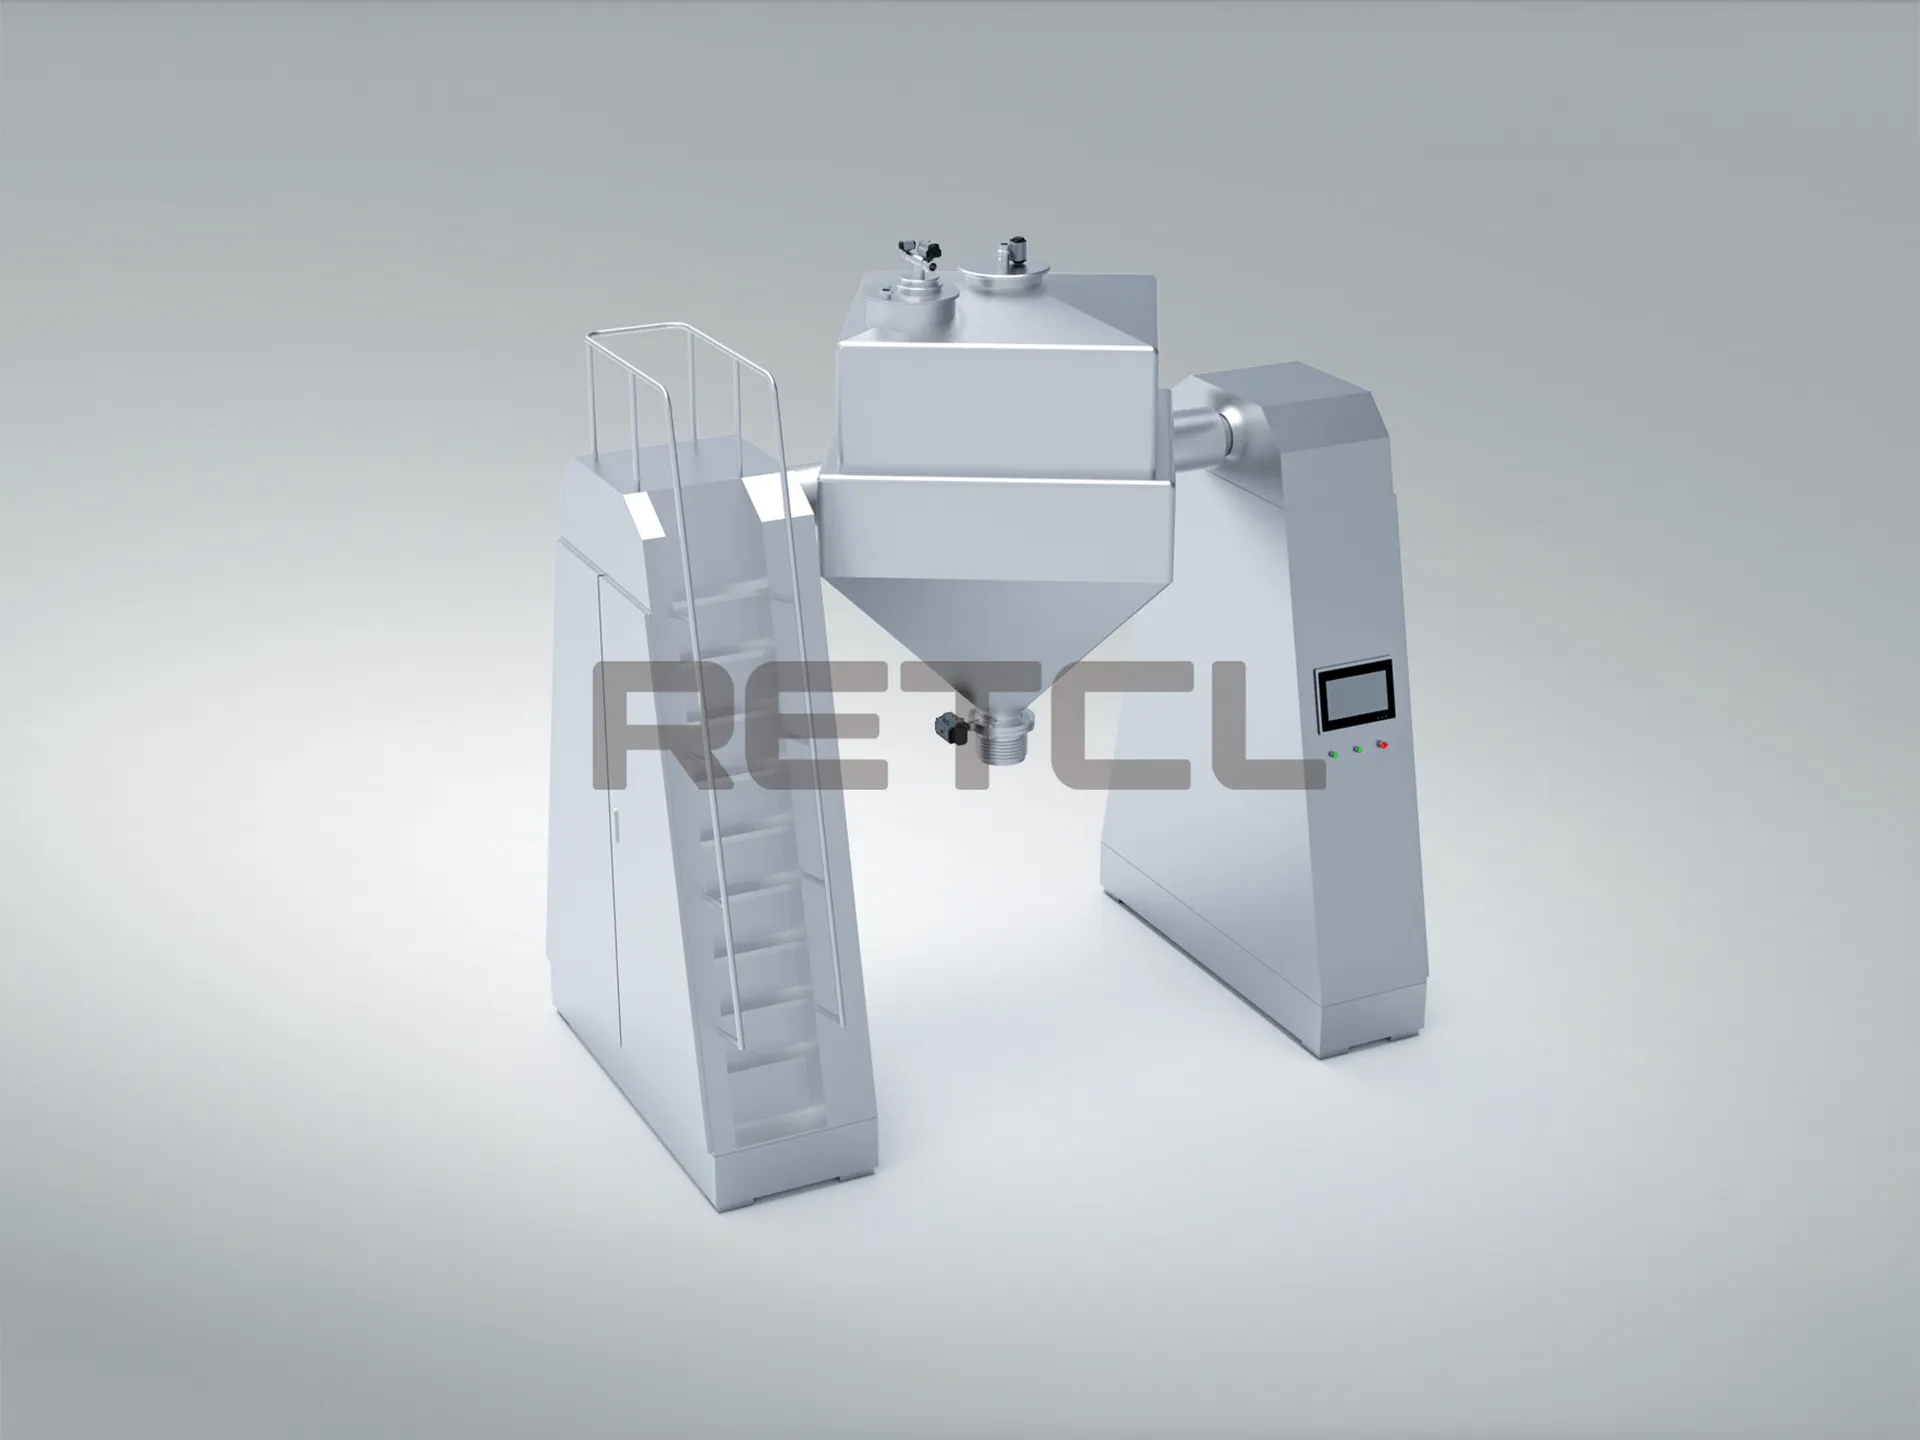 Double cone blender mixing machine rendered in 3D on a gray background, showing the equipment's stainless steel construction with access ladders and a digital control panel.